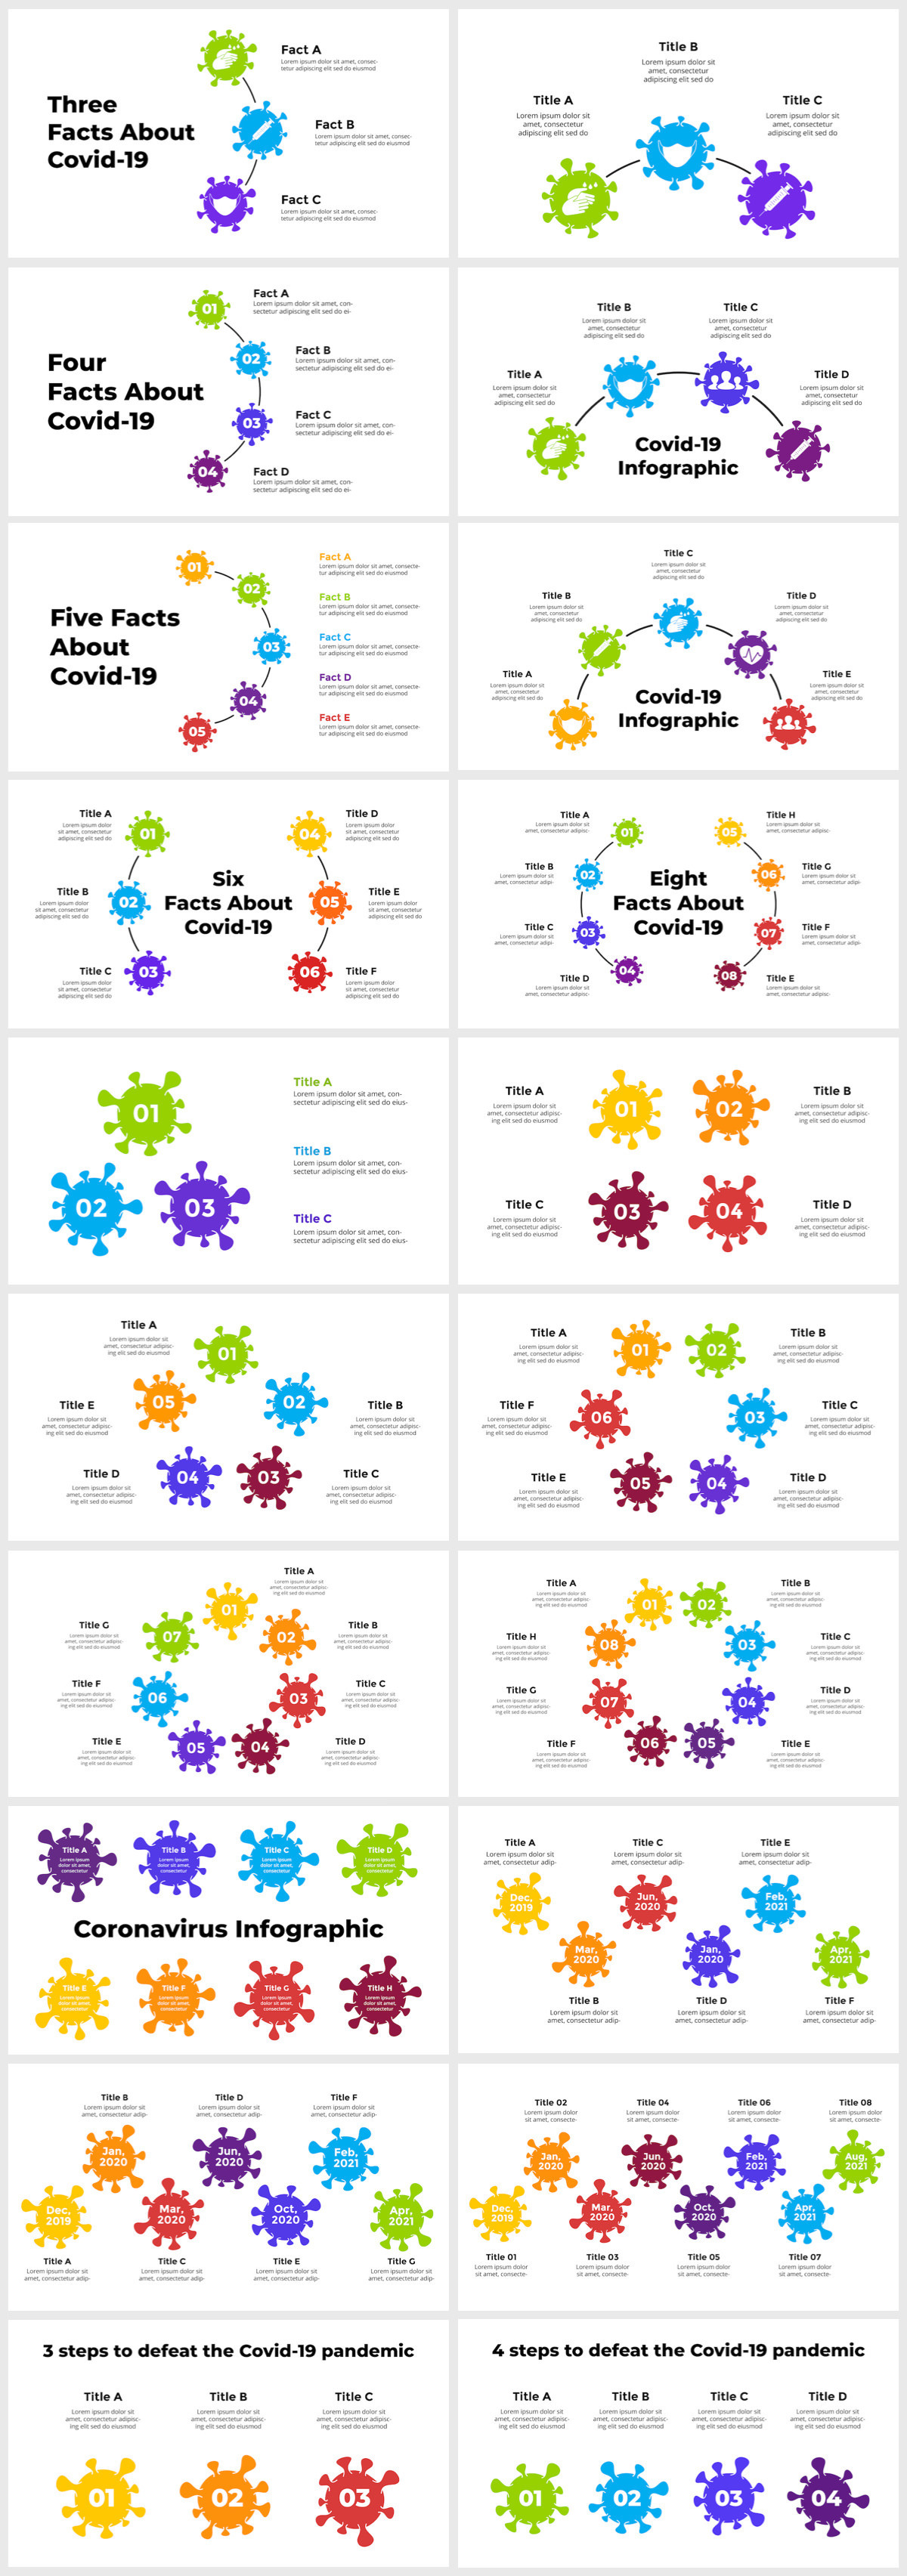 Wowly - 3500 Infographics & Presentation Templates! Updated! PowerPoint Canva Figma Sketch Ai Psd. - 312